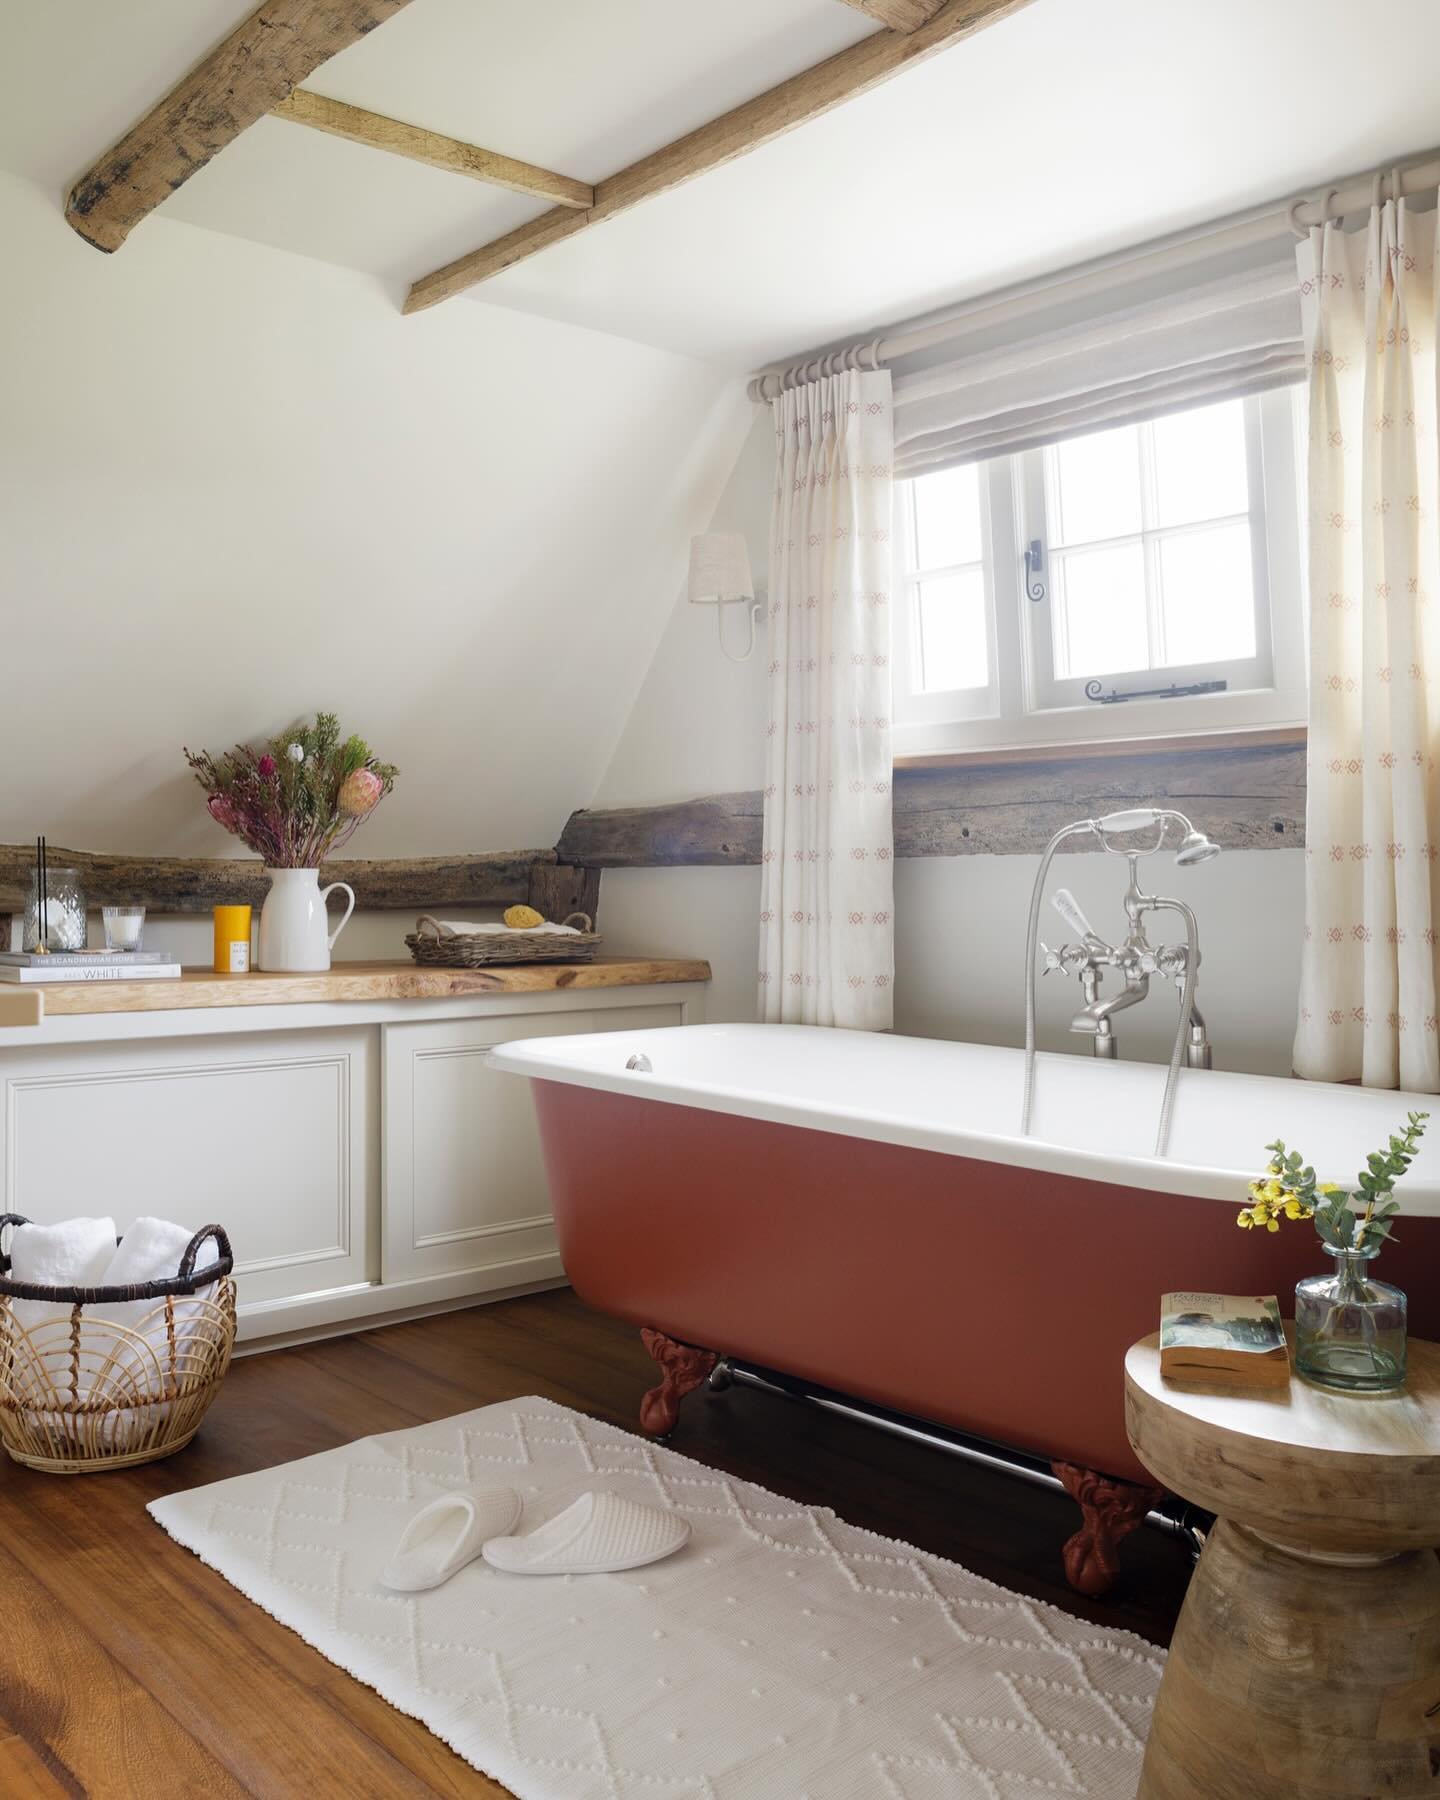 How we created this earthy and warm bathroom ✨ ~ 

The perfect place for a restful bath at the end of the day, we used a mixture of wood tones and layered textures to create a bathroom which feels warm, cosy and luxurious. 

The beams were originally